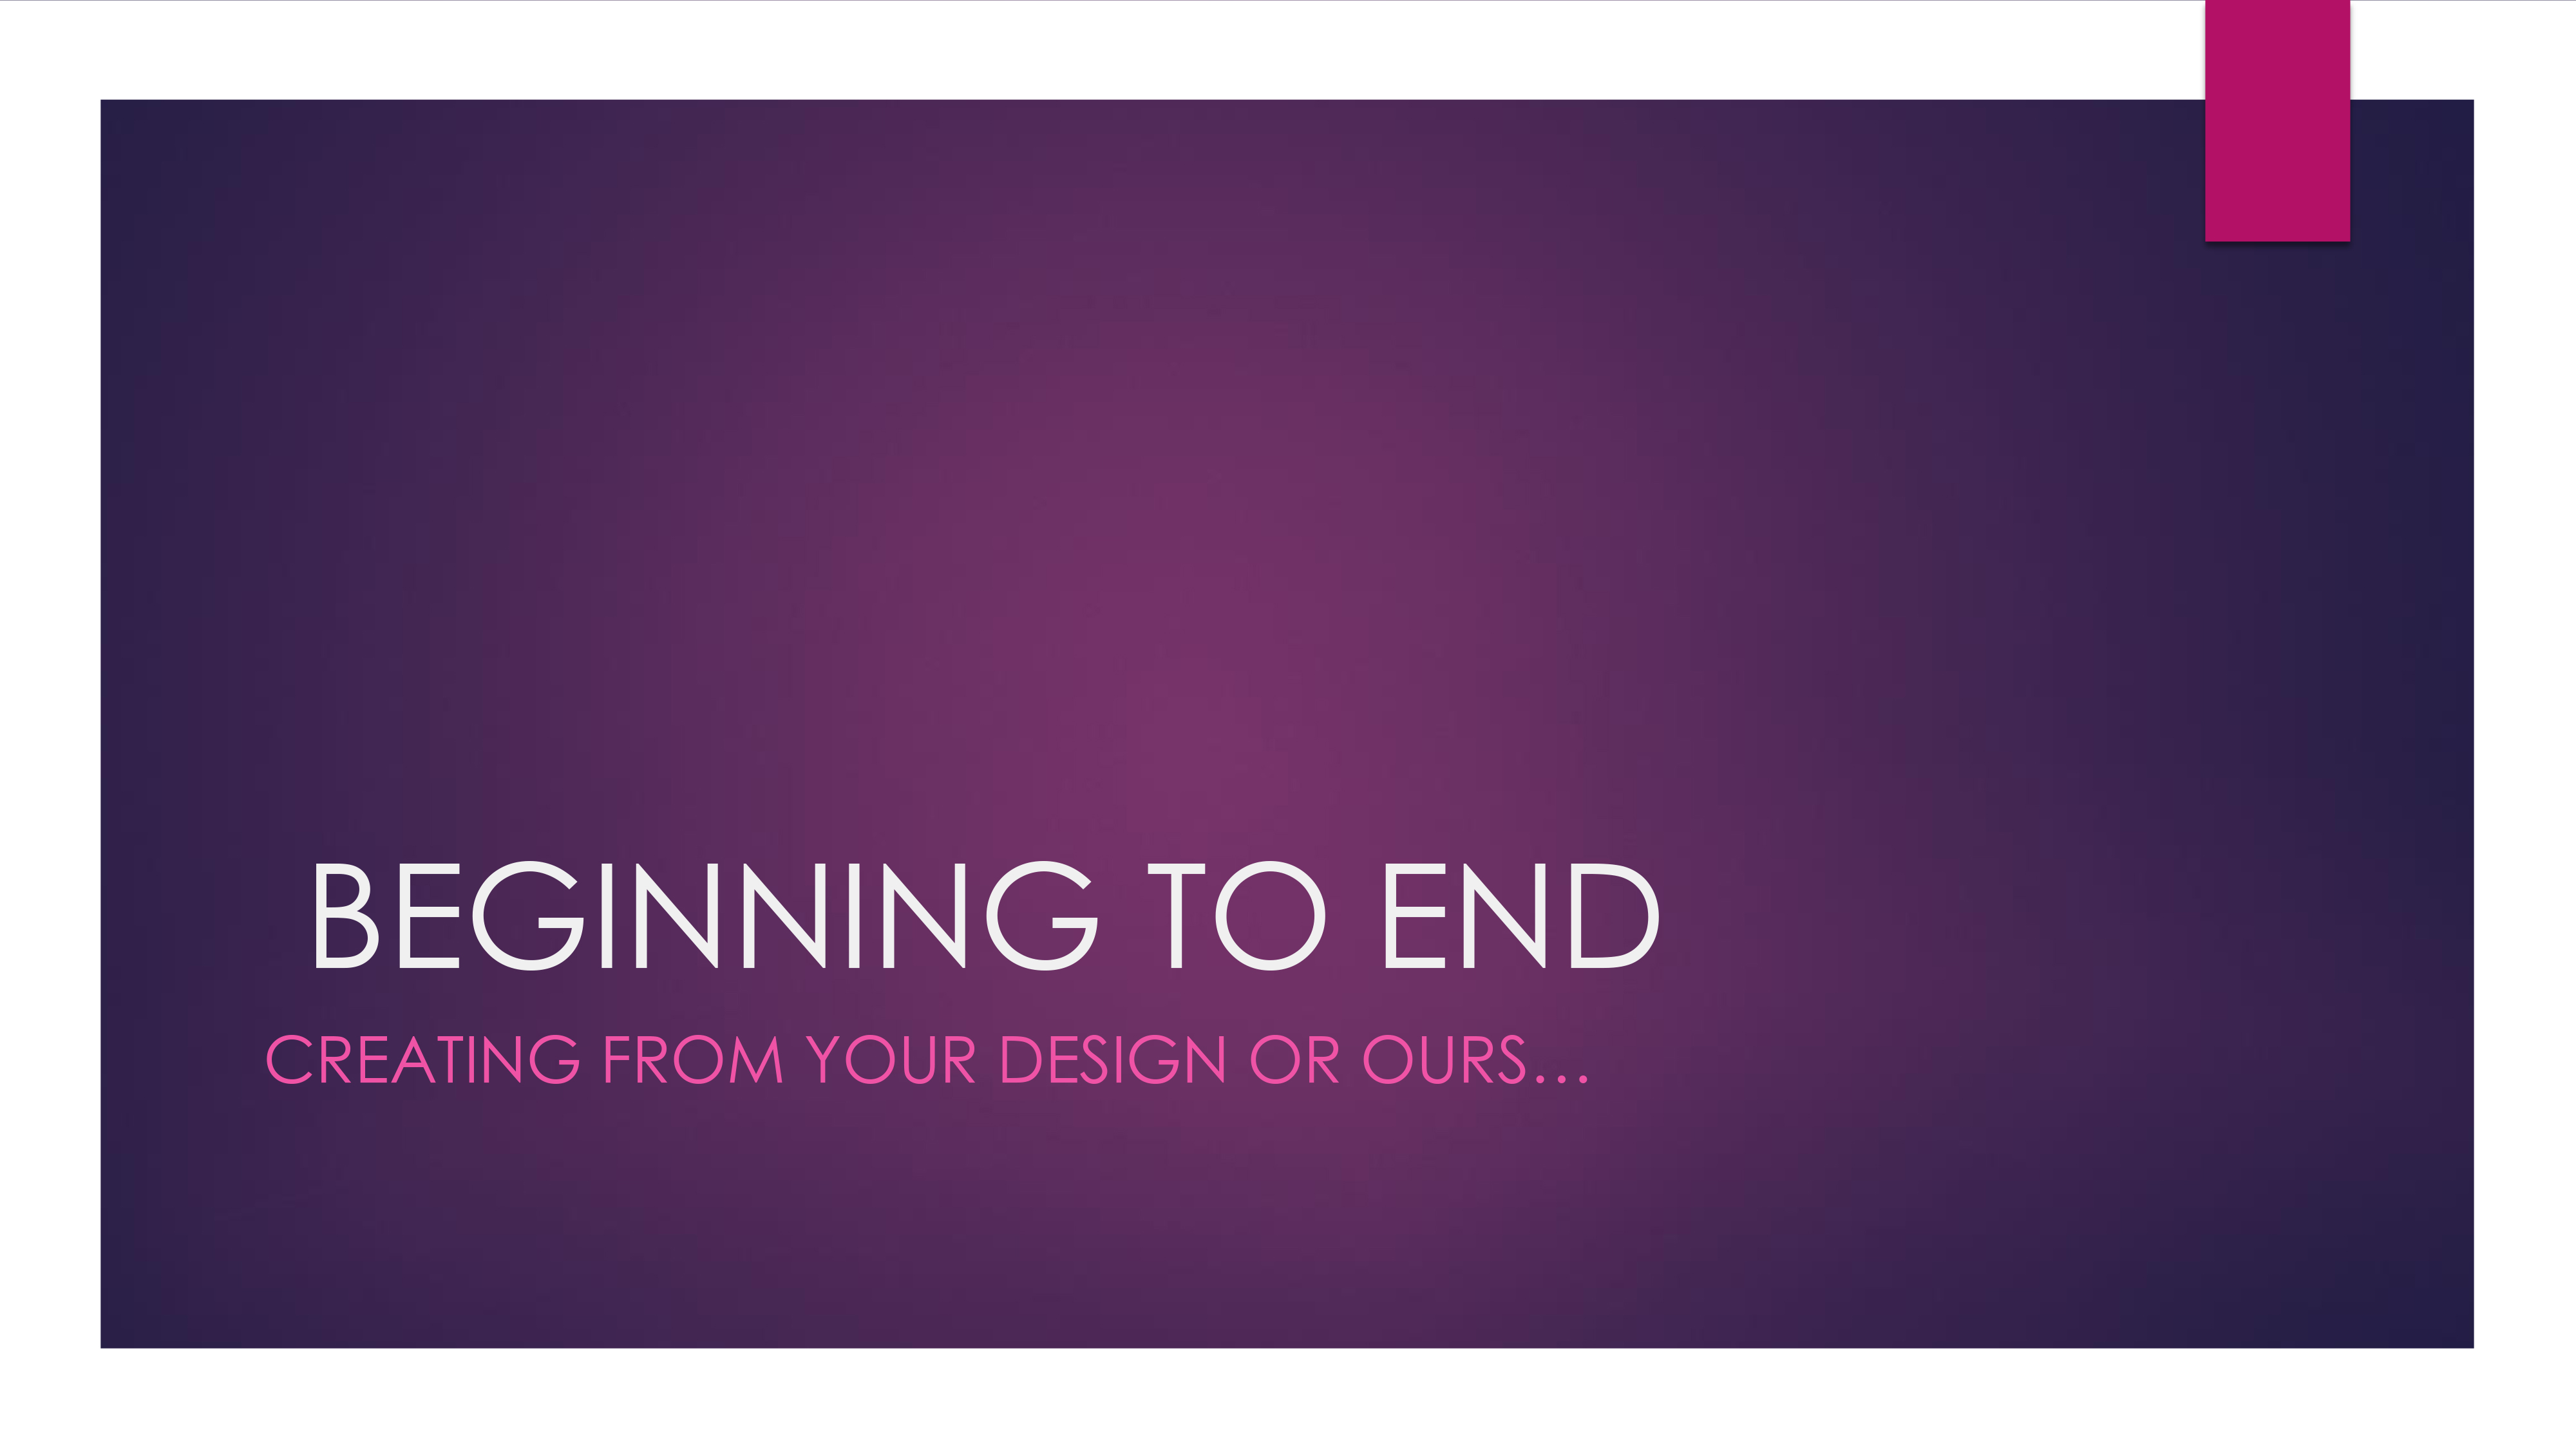 Beginning to End: Creating From Your Design or Ours...